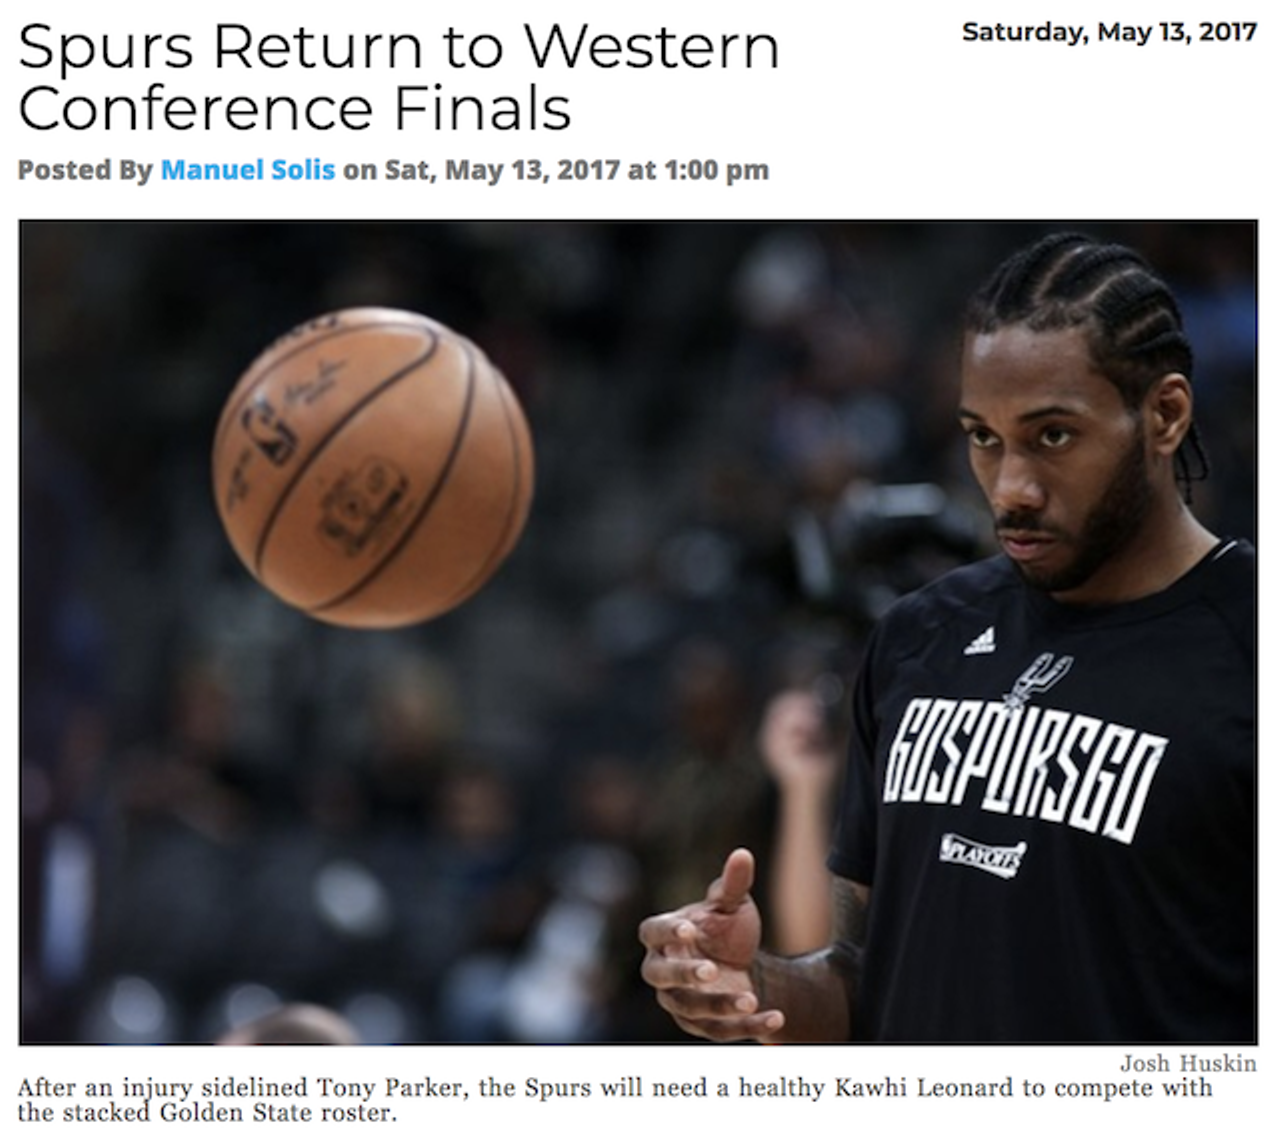 The Spurs advanced far into the playoffs last season. Unfortunately, they had to play the Golden State Warriors, who sweeped them 4-0. There’s always next time. Read more.